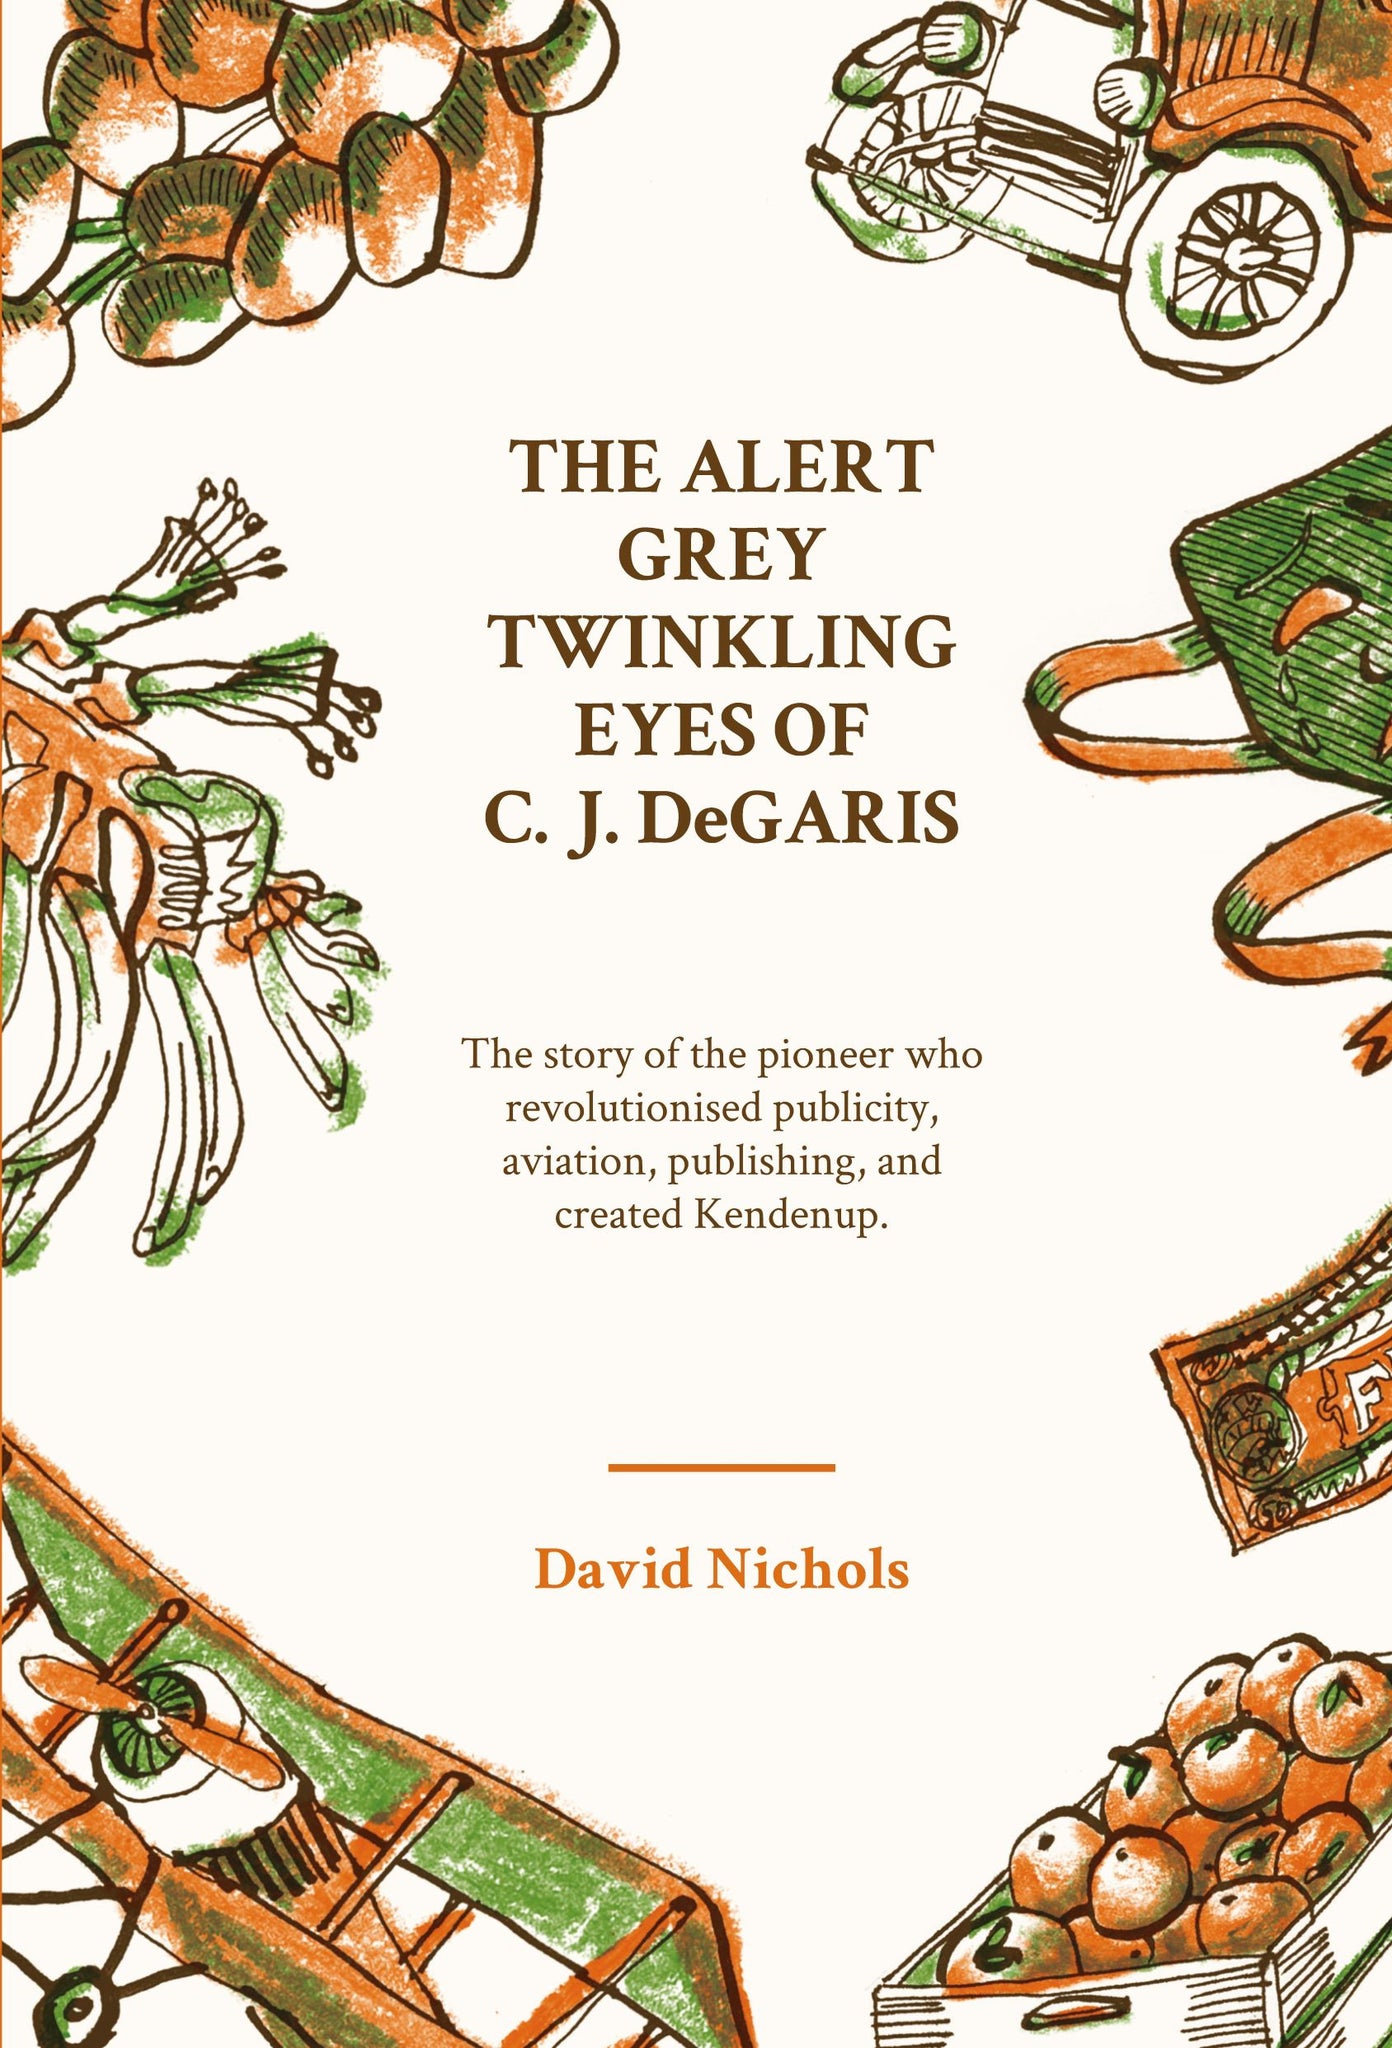 The cover of The Alert Grey Twinkling Eyes of C. J. DeGaris